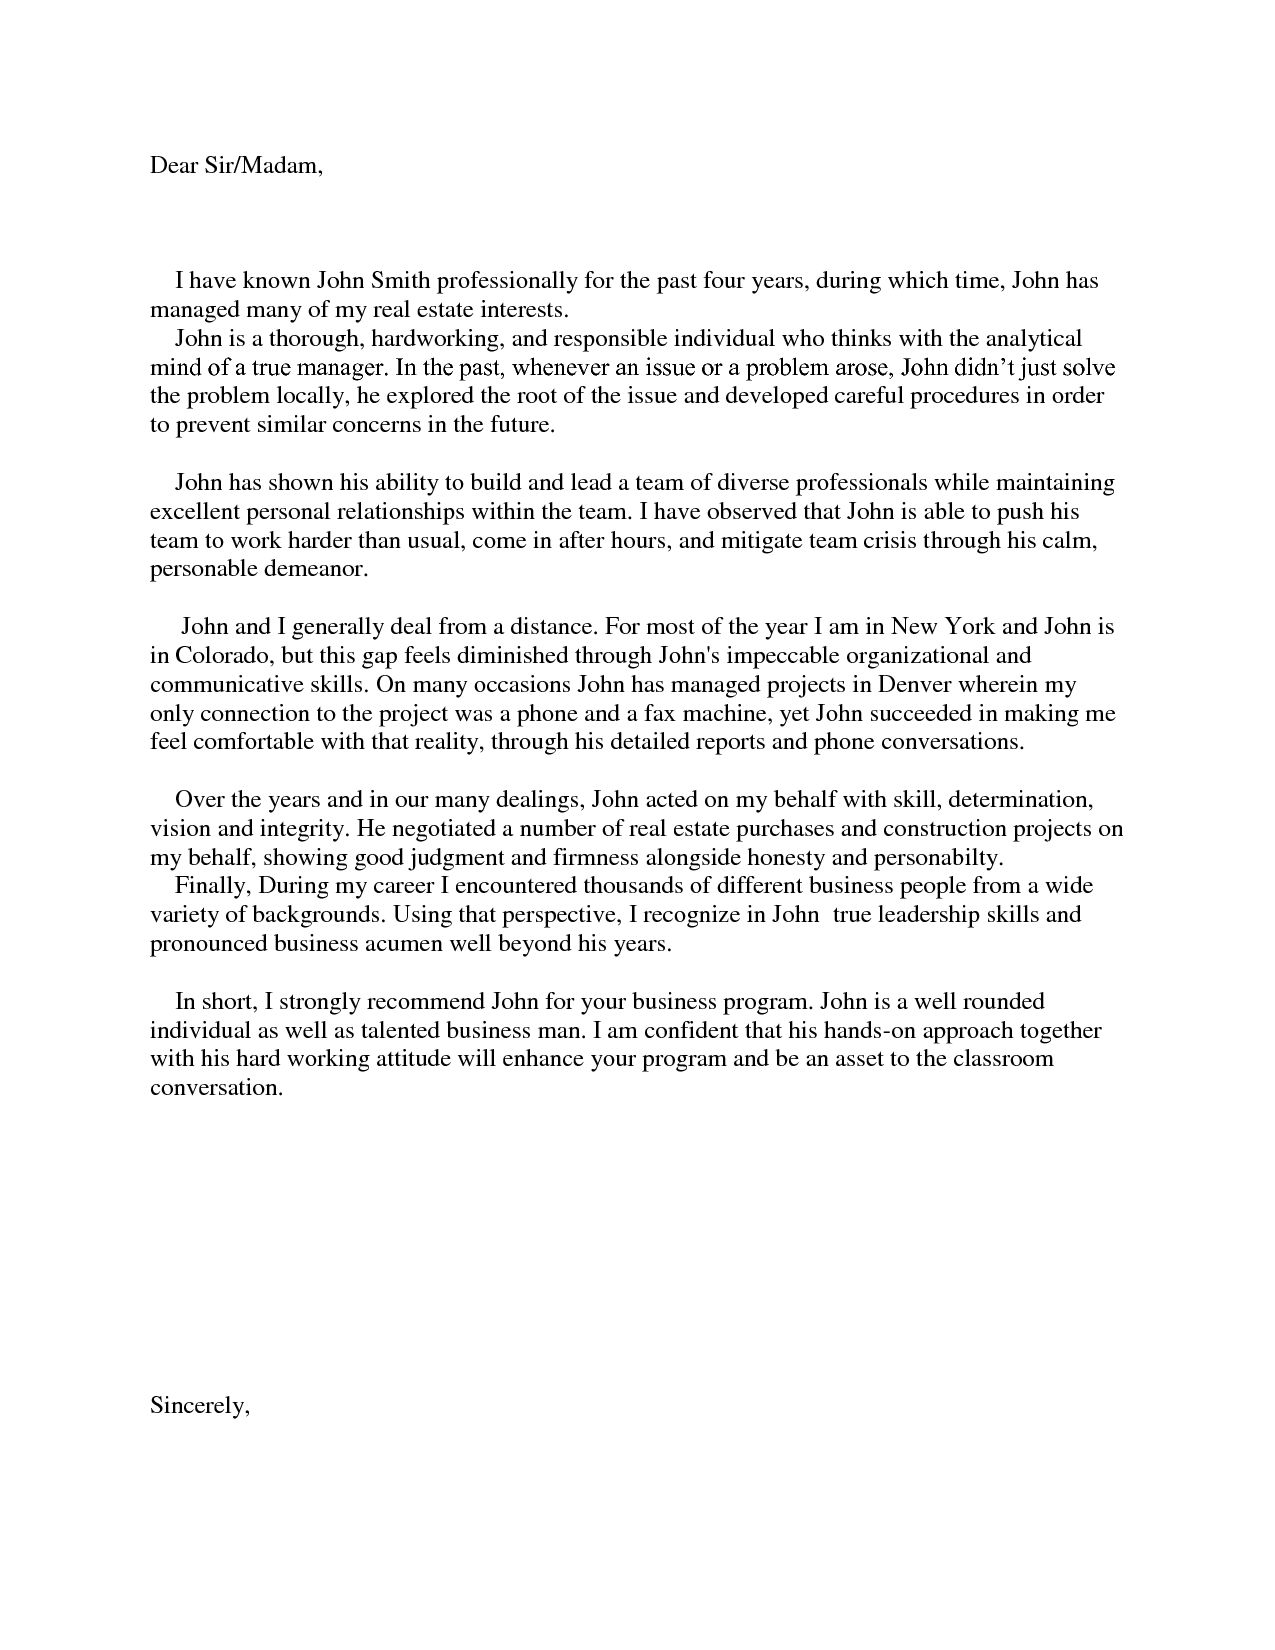 Sample Letter Of Recommendation For Business School Gallery with size 1275 X 1650